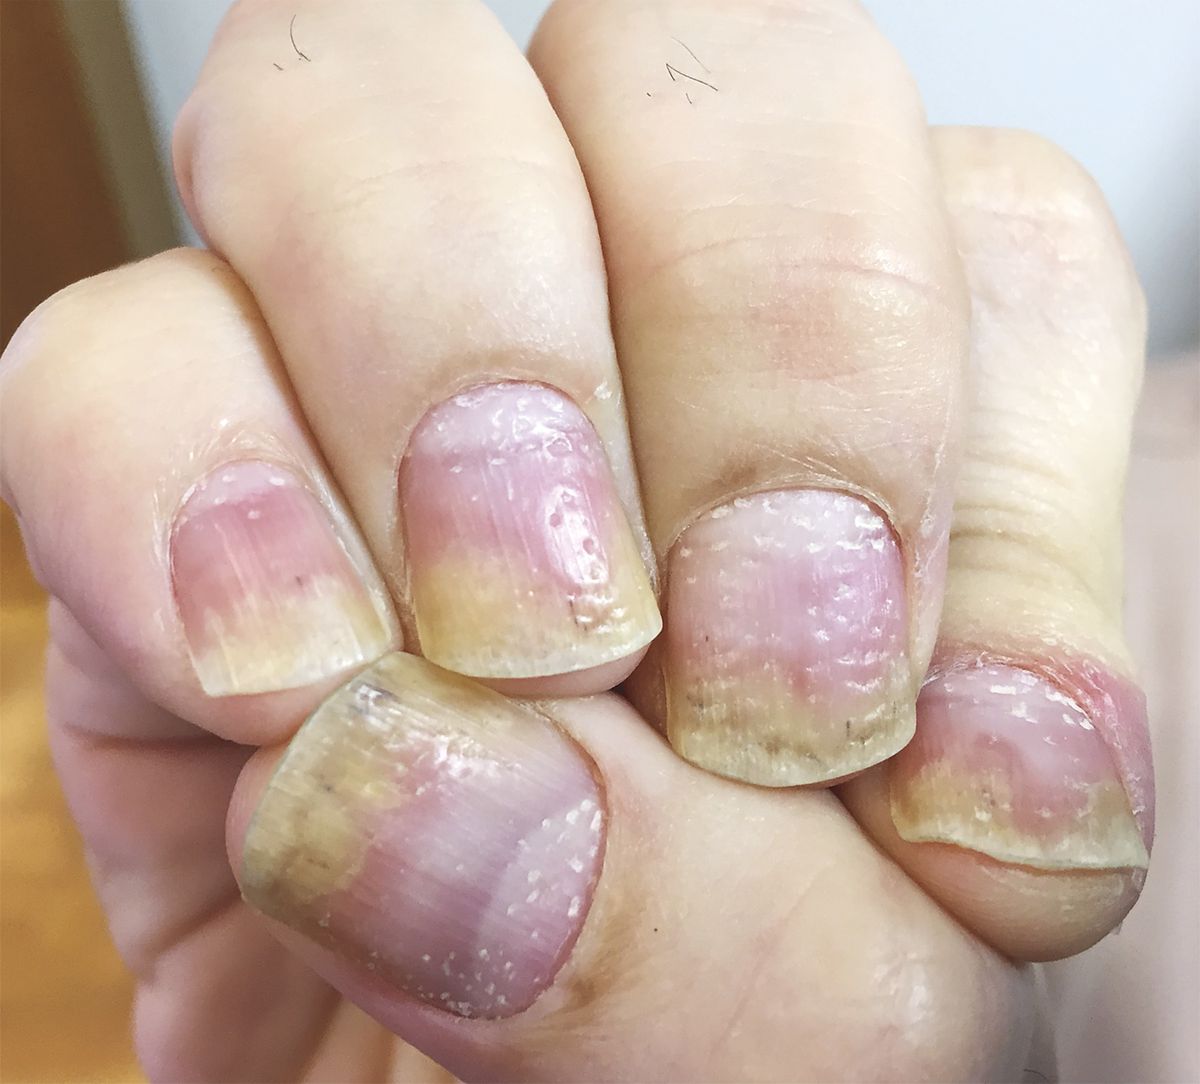 This Man's Nails Look Dented&mdash;but Are Actually a Symptom of Something More Serious